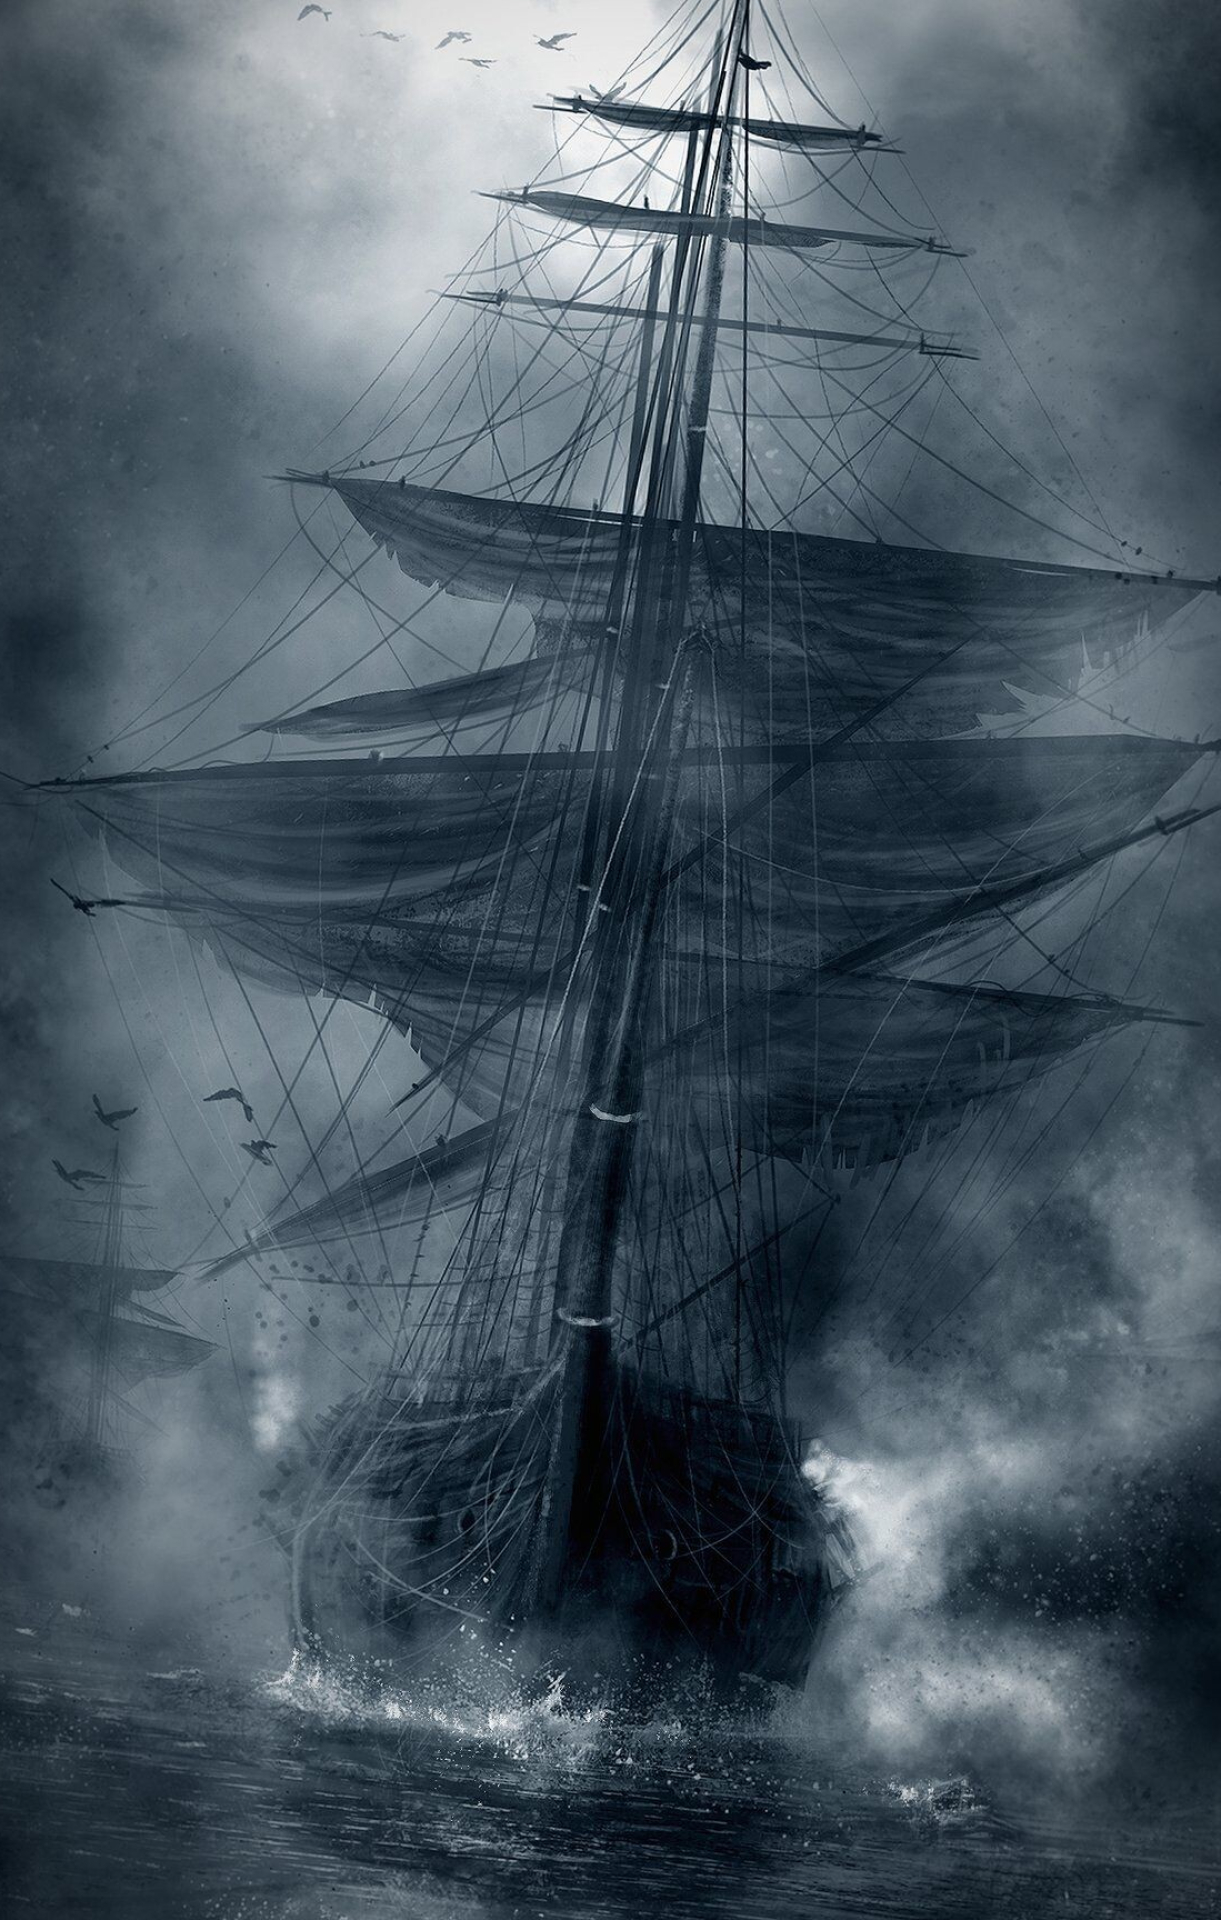 Ghost Ship: Mary Celeste, the Flying Dutchman, and the SS Valencia are the most famous representatives. 1230x1920 HD Background.